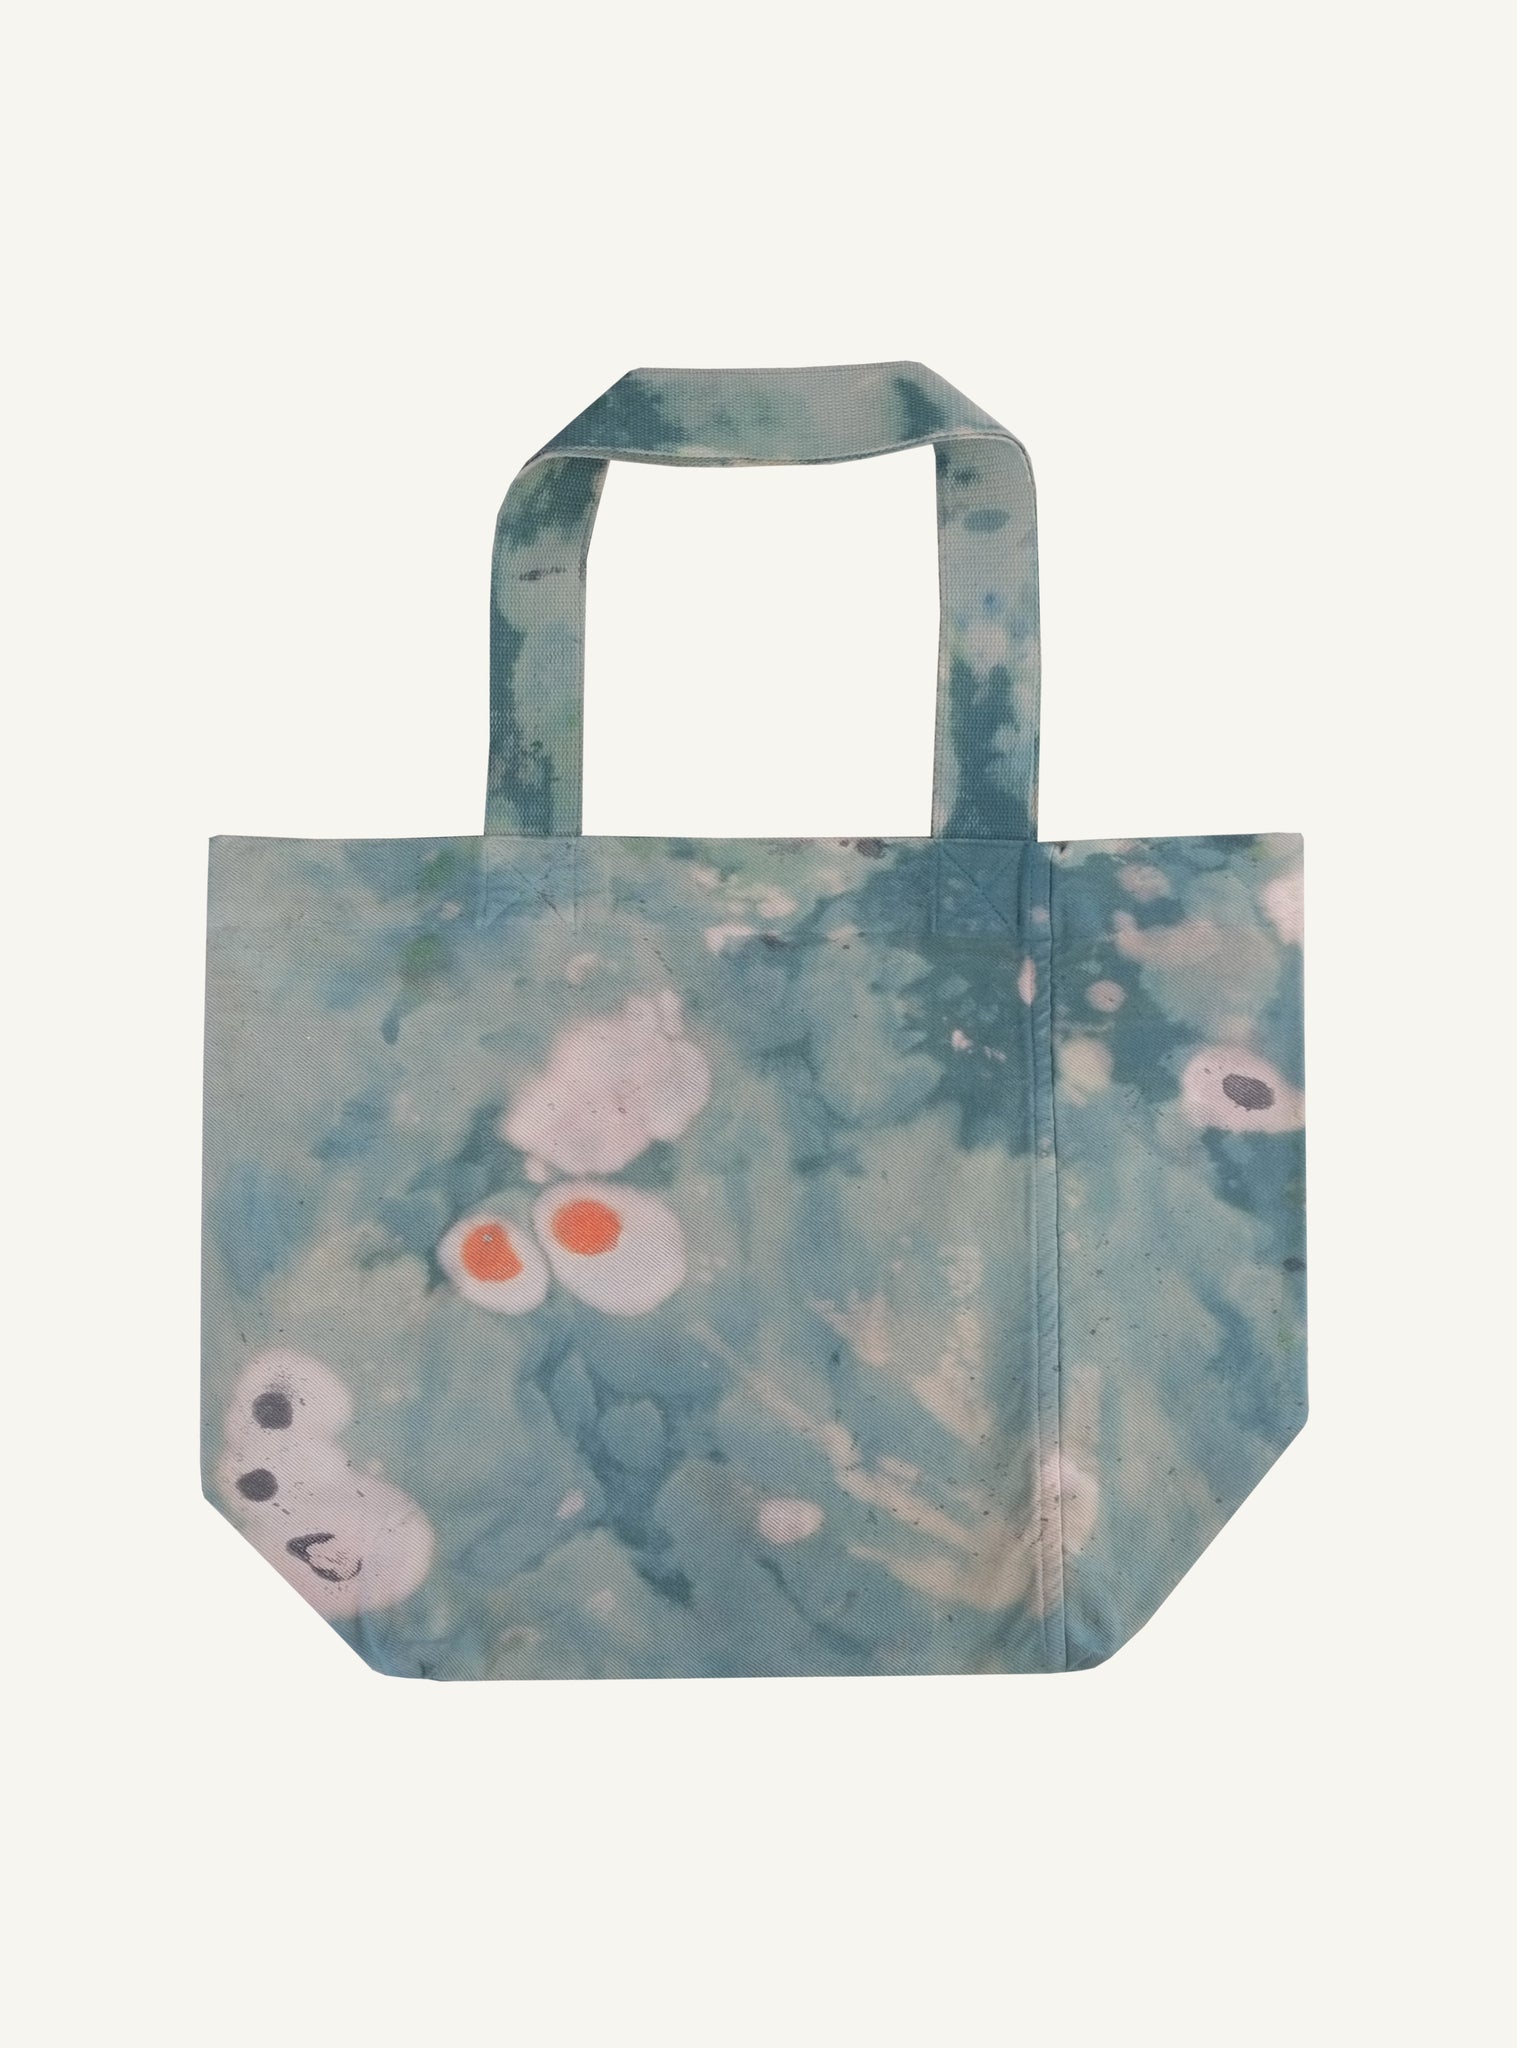 BACTERIA X ZAROYKO — Pidgeon Daydreaming of Lost Eggs Whilst Flying Tote